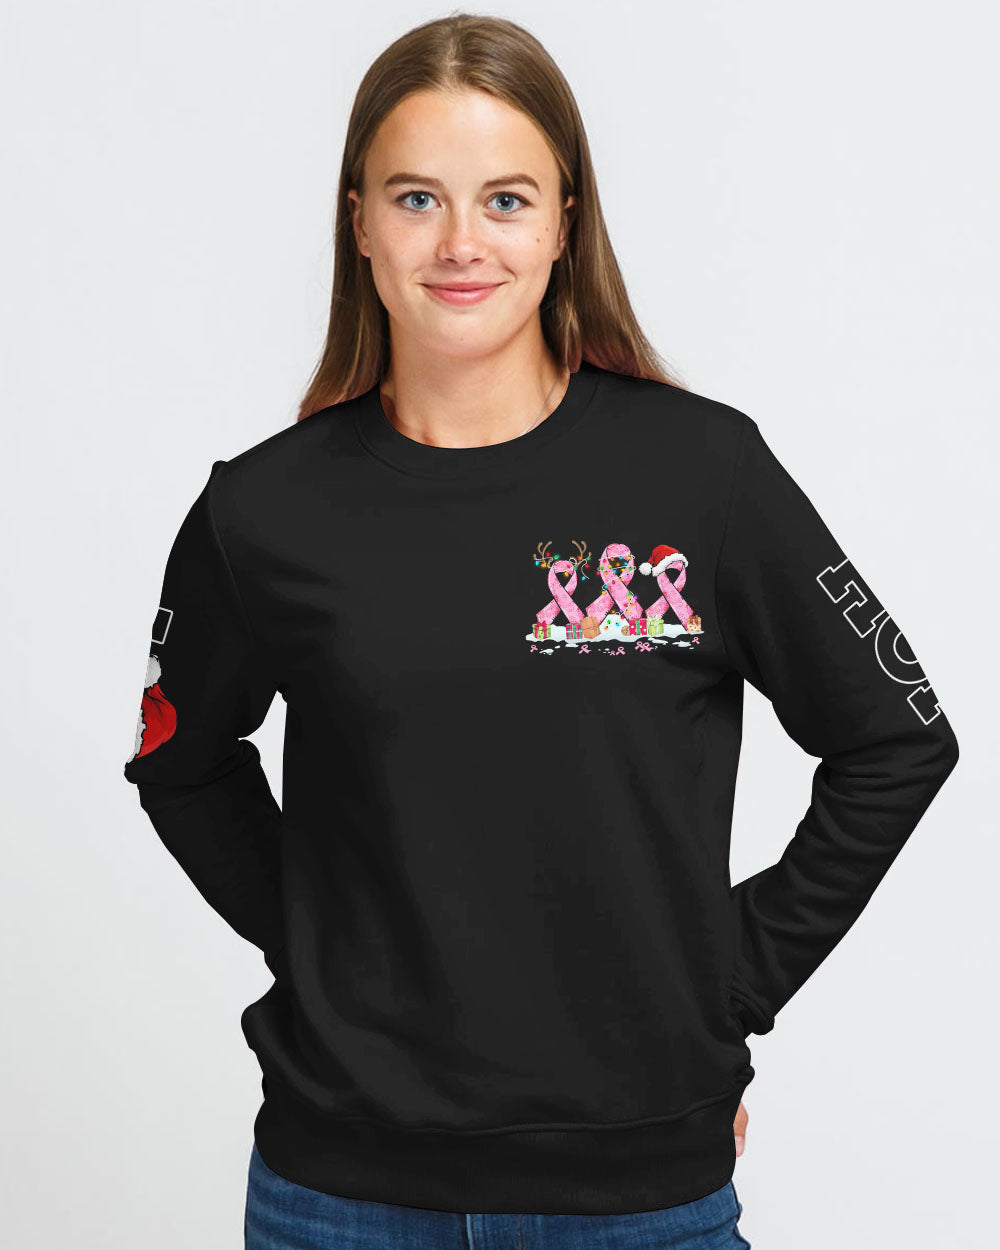 Hope For A Cure Ribbon Christmas Women's Breast Cancer Awareness Sweatshirt